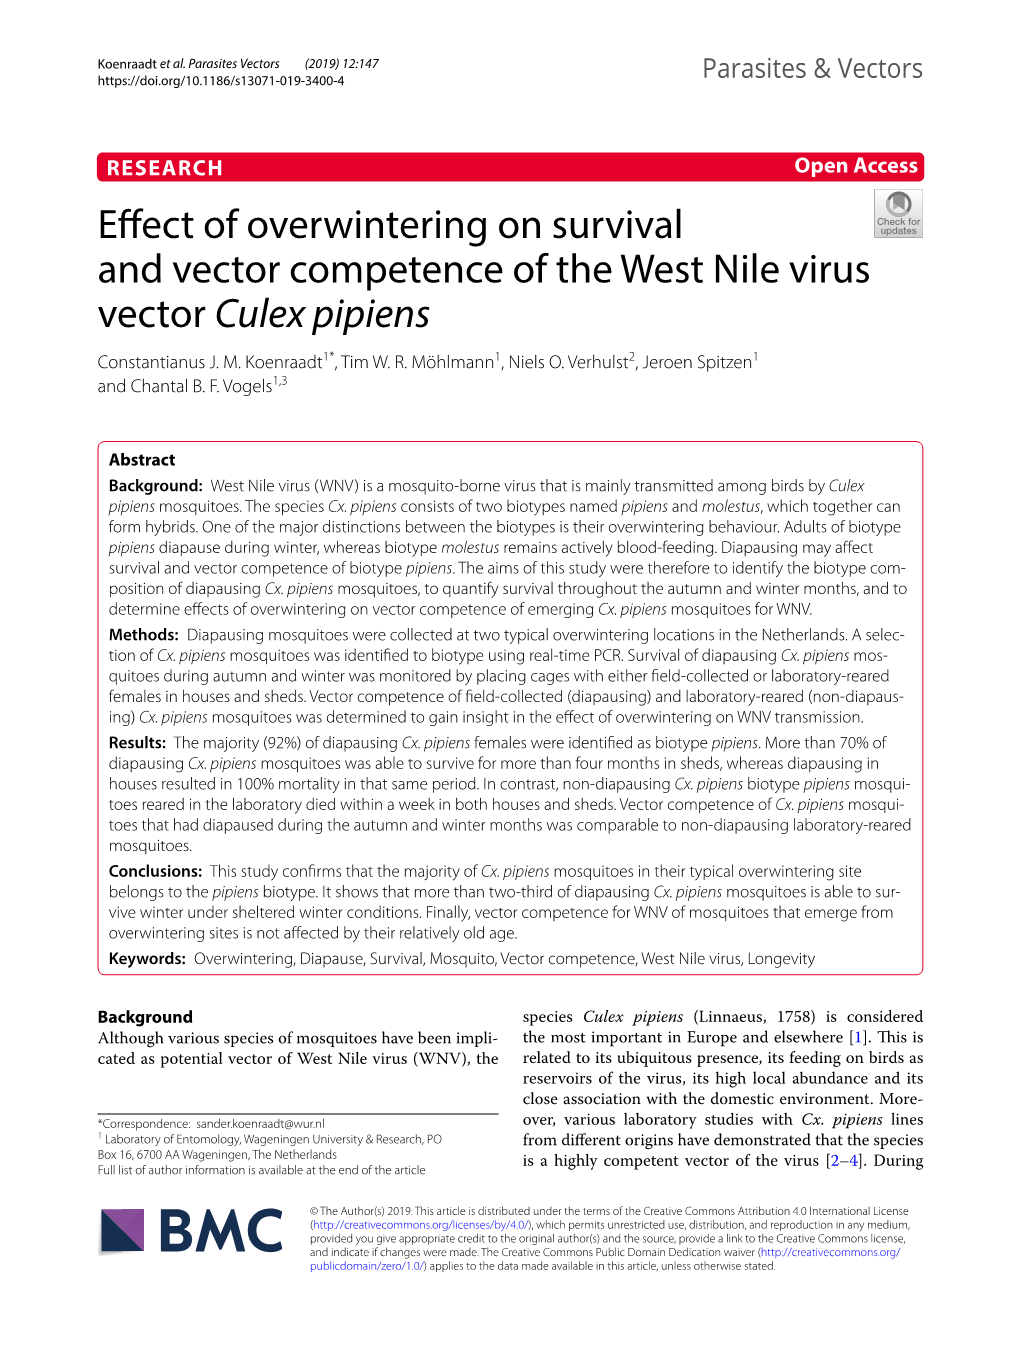 Effect of Overwintering on Survival and Vector Competence of the West Nile